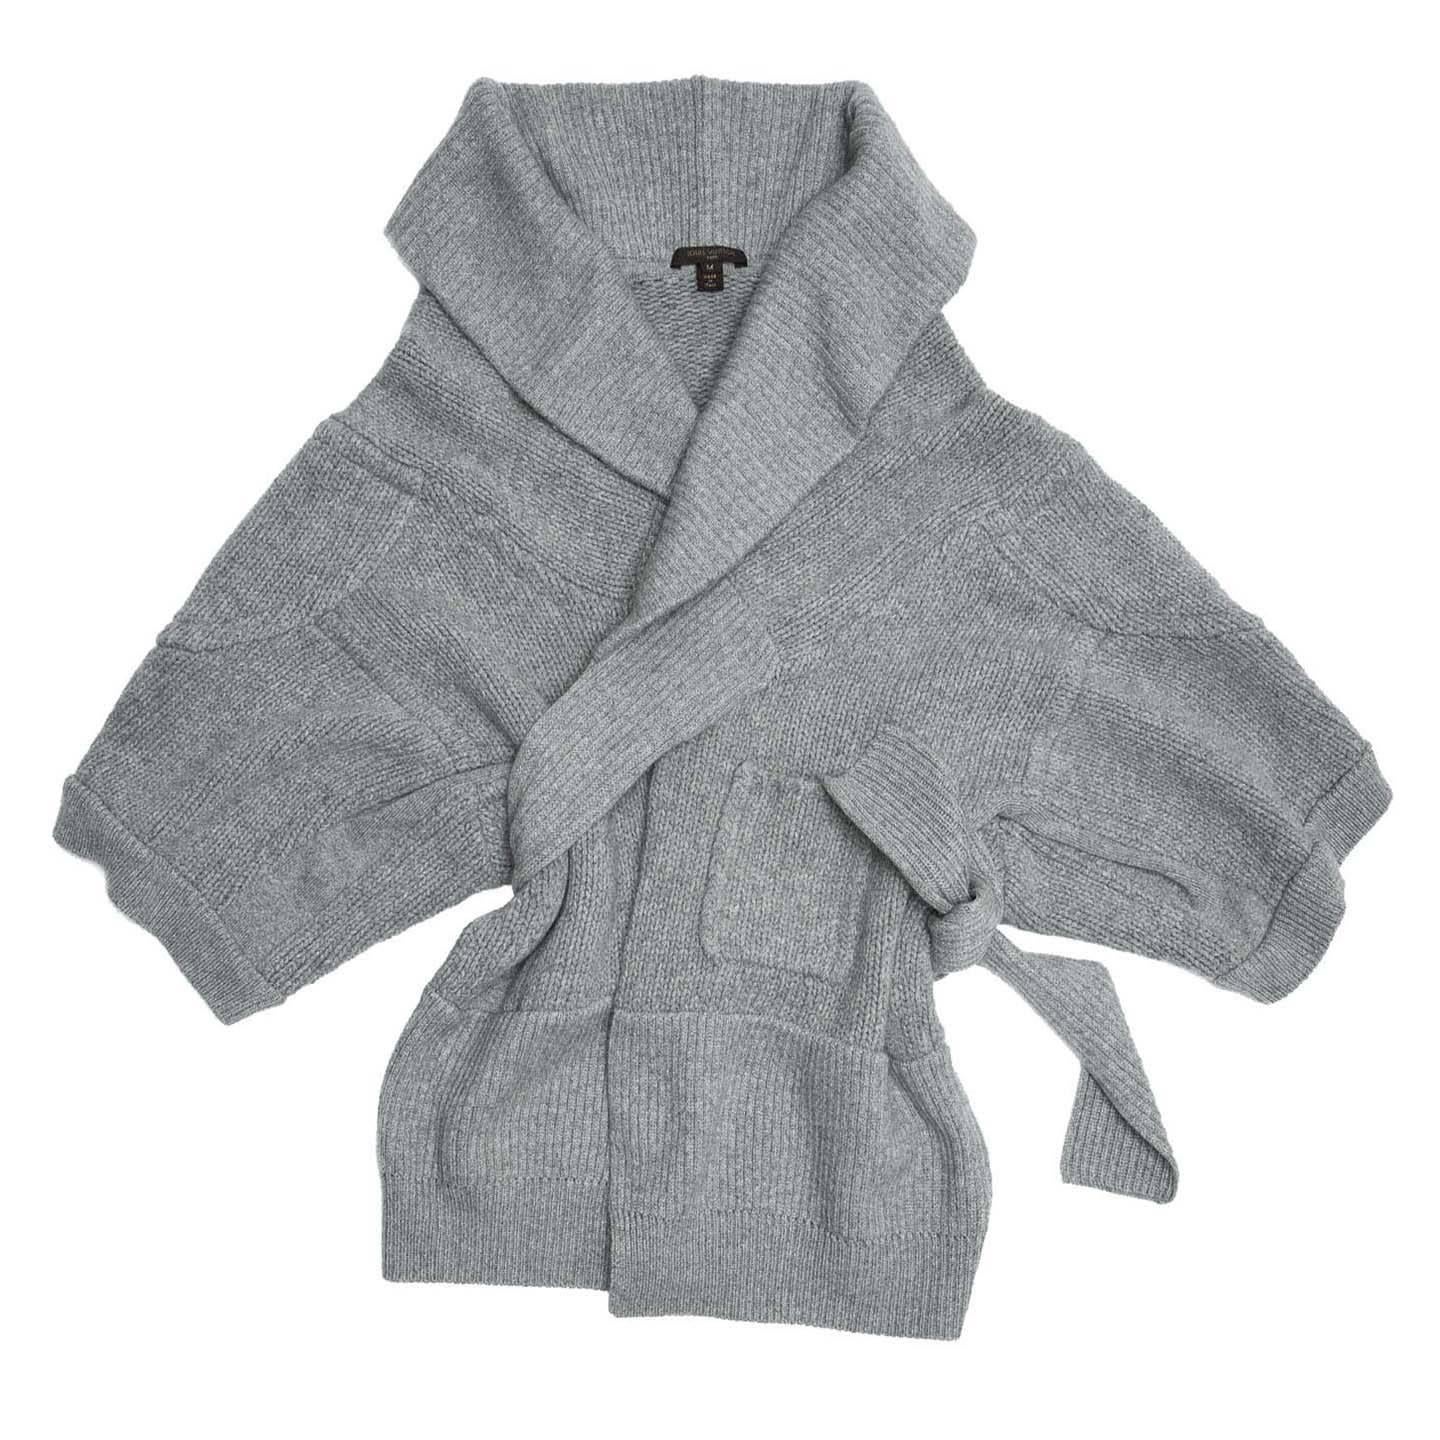 Very warm grey thick knit wrap style cardigan with a shawl neck. The sleeves are 3/4 length and two ties are attached under the collar to use as belt. The knit can be worn as cardigan or jacket.

Size  M Universal sizing

Condition  Excellent: